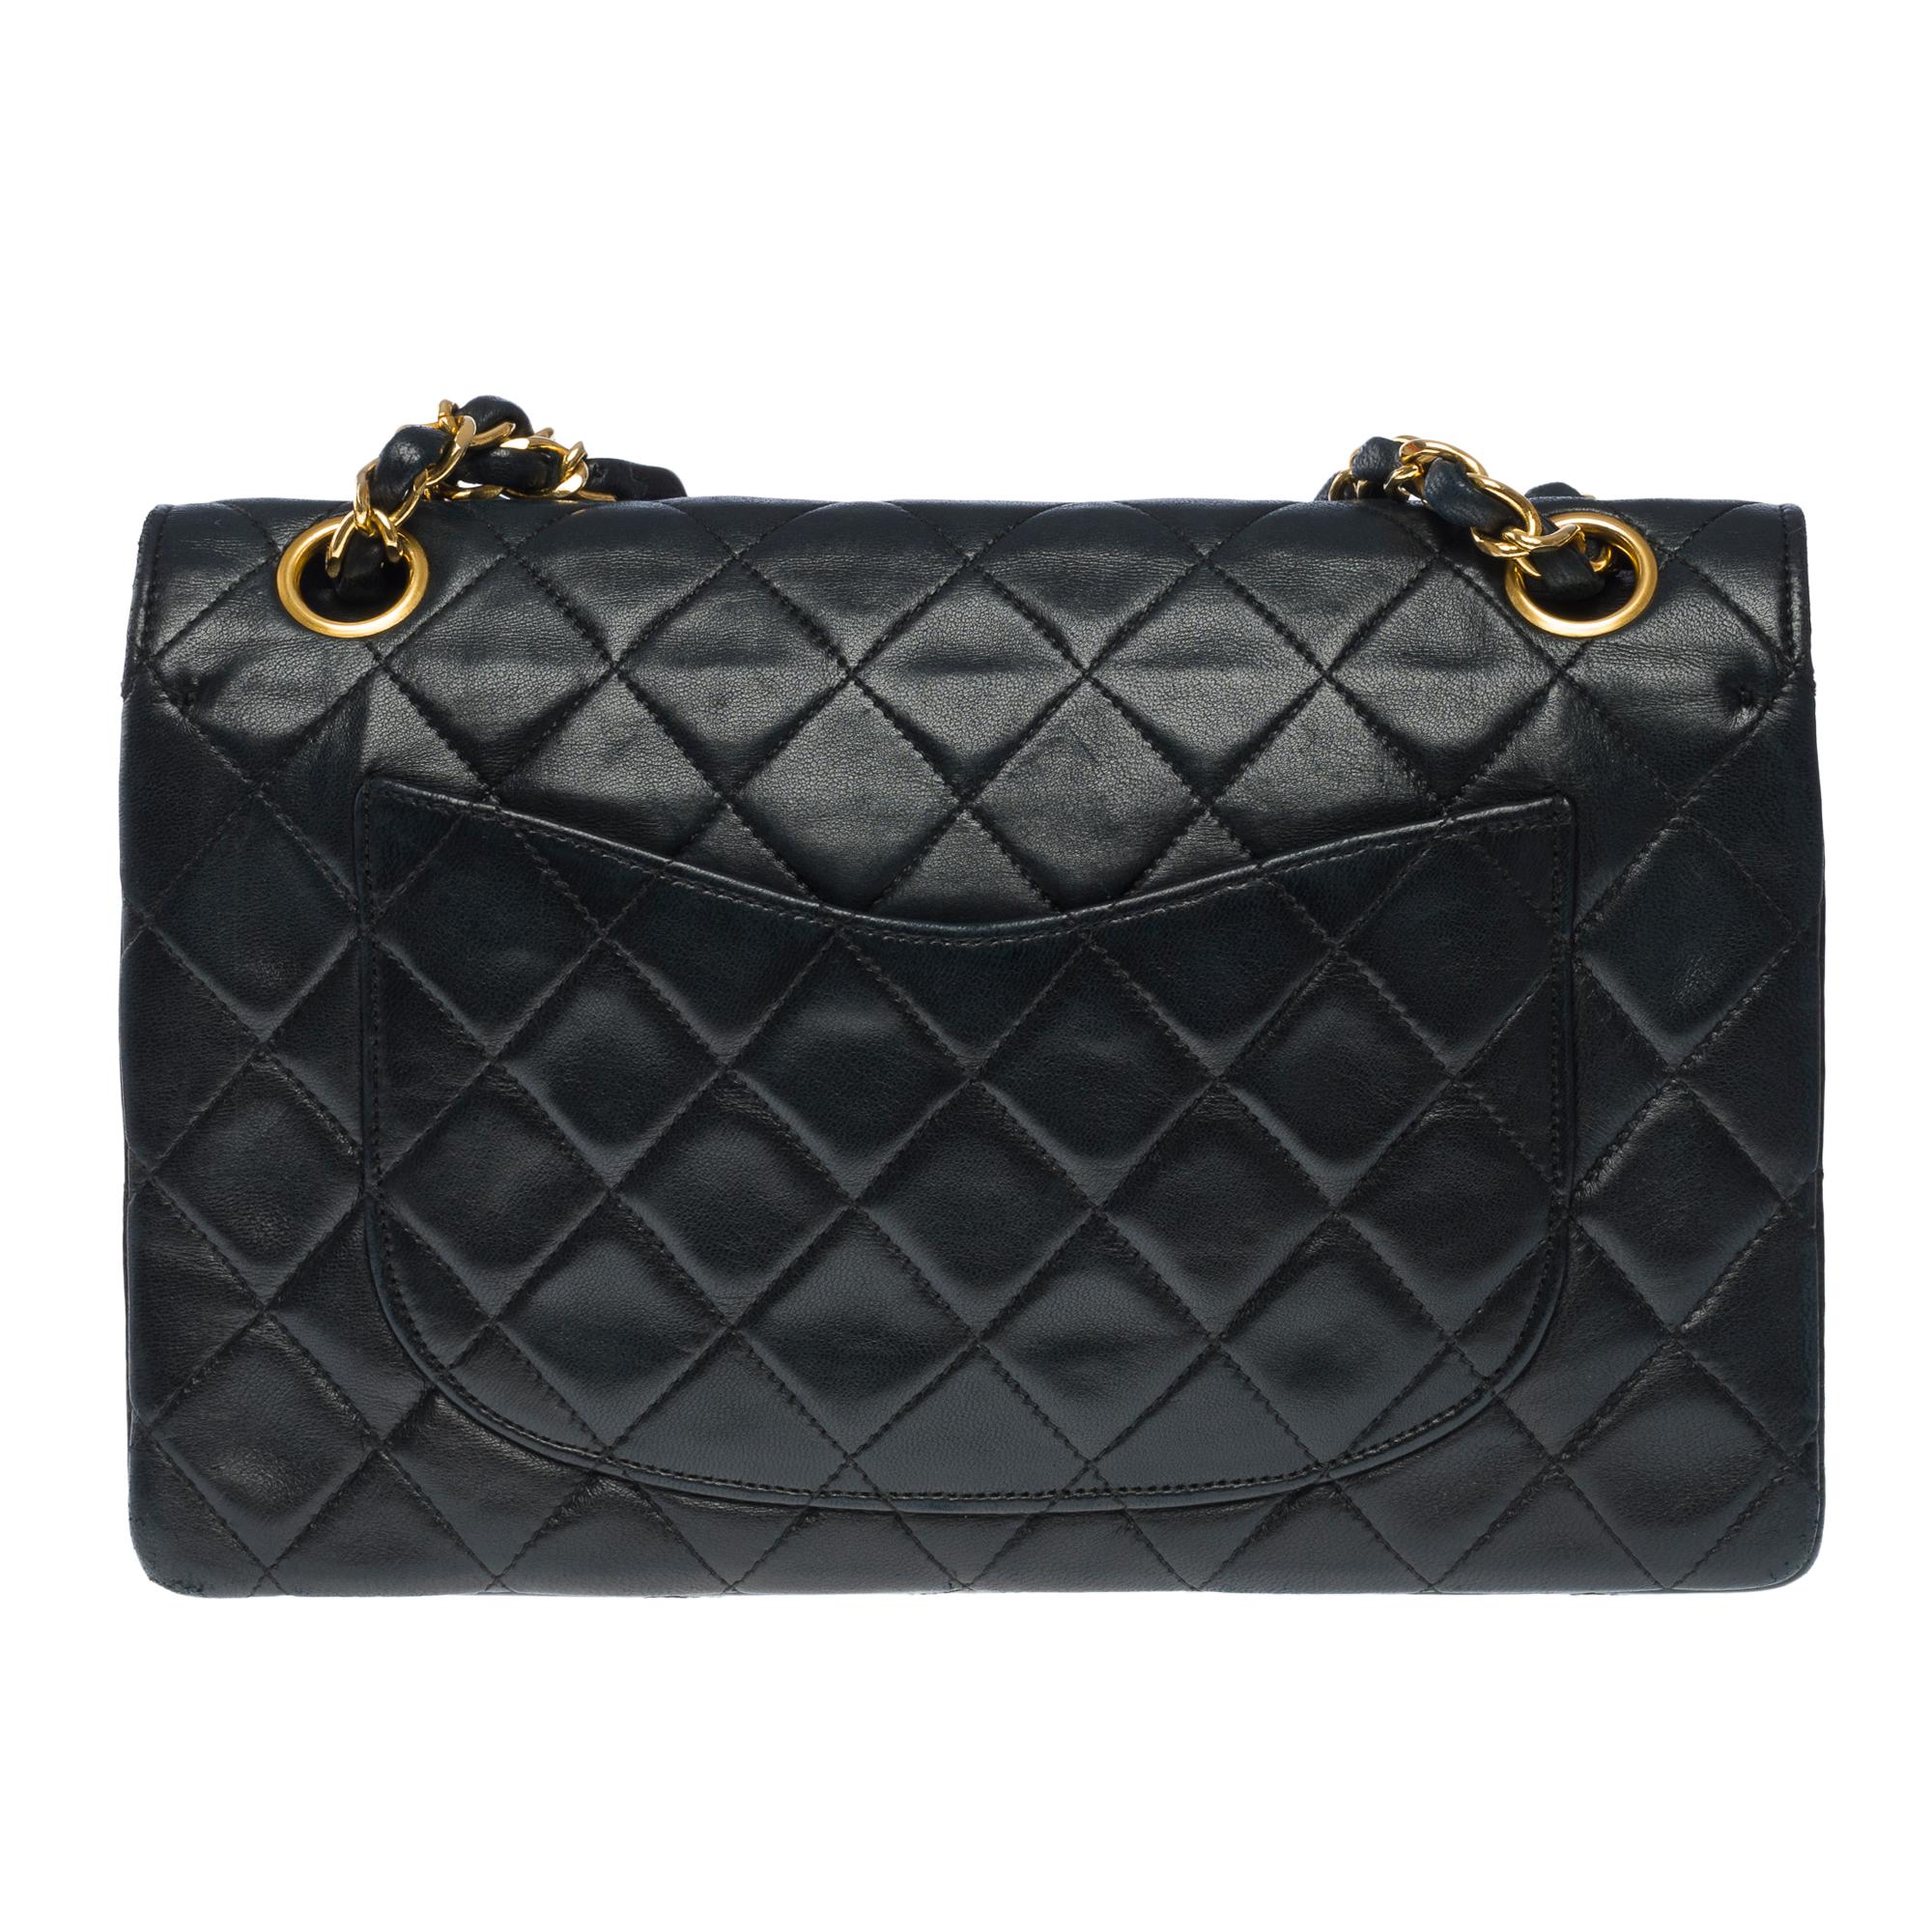 Women's Chanel Timeless 23cm double flap shoulder bag in black quilted lambskin, GHW